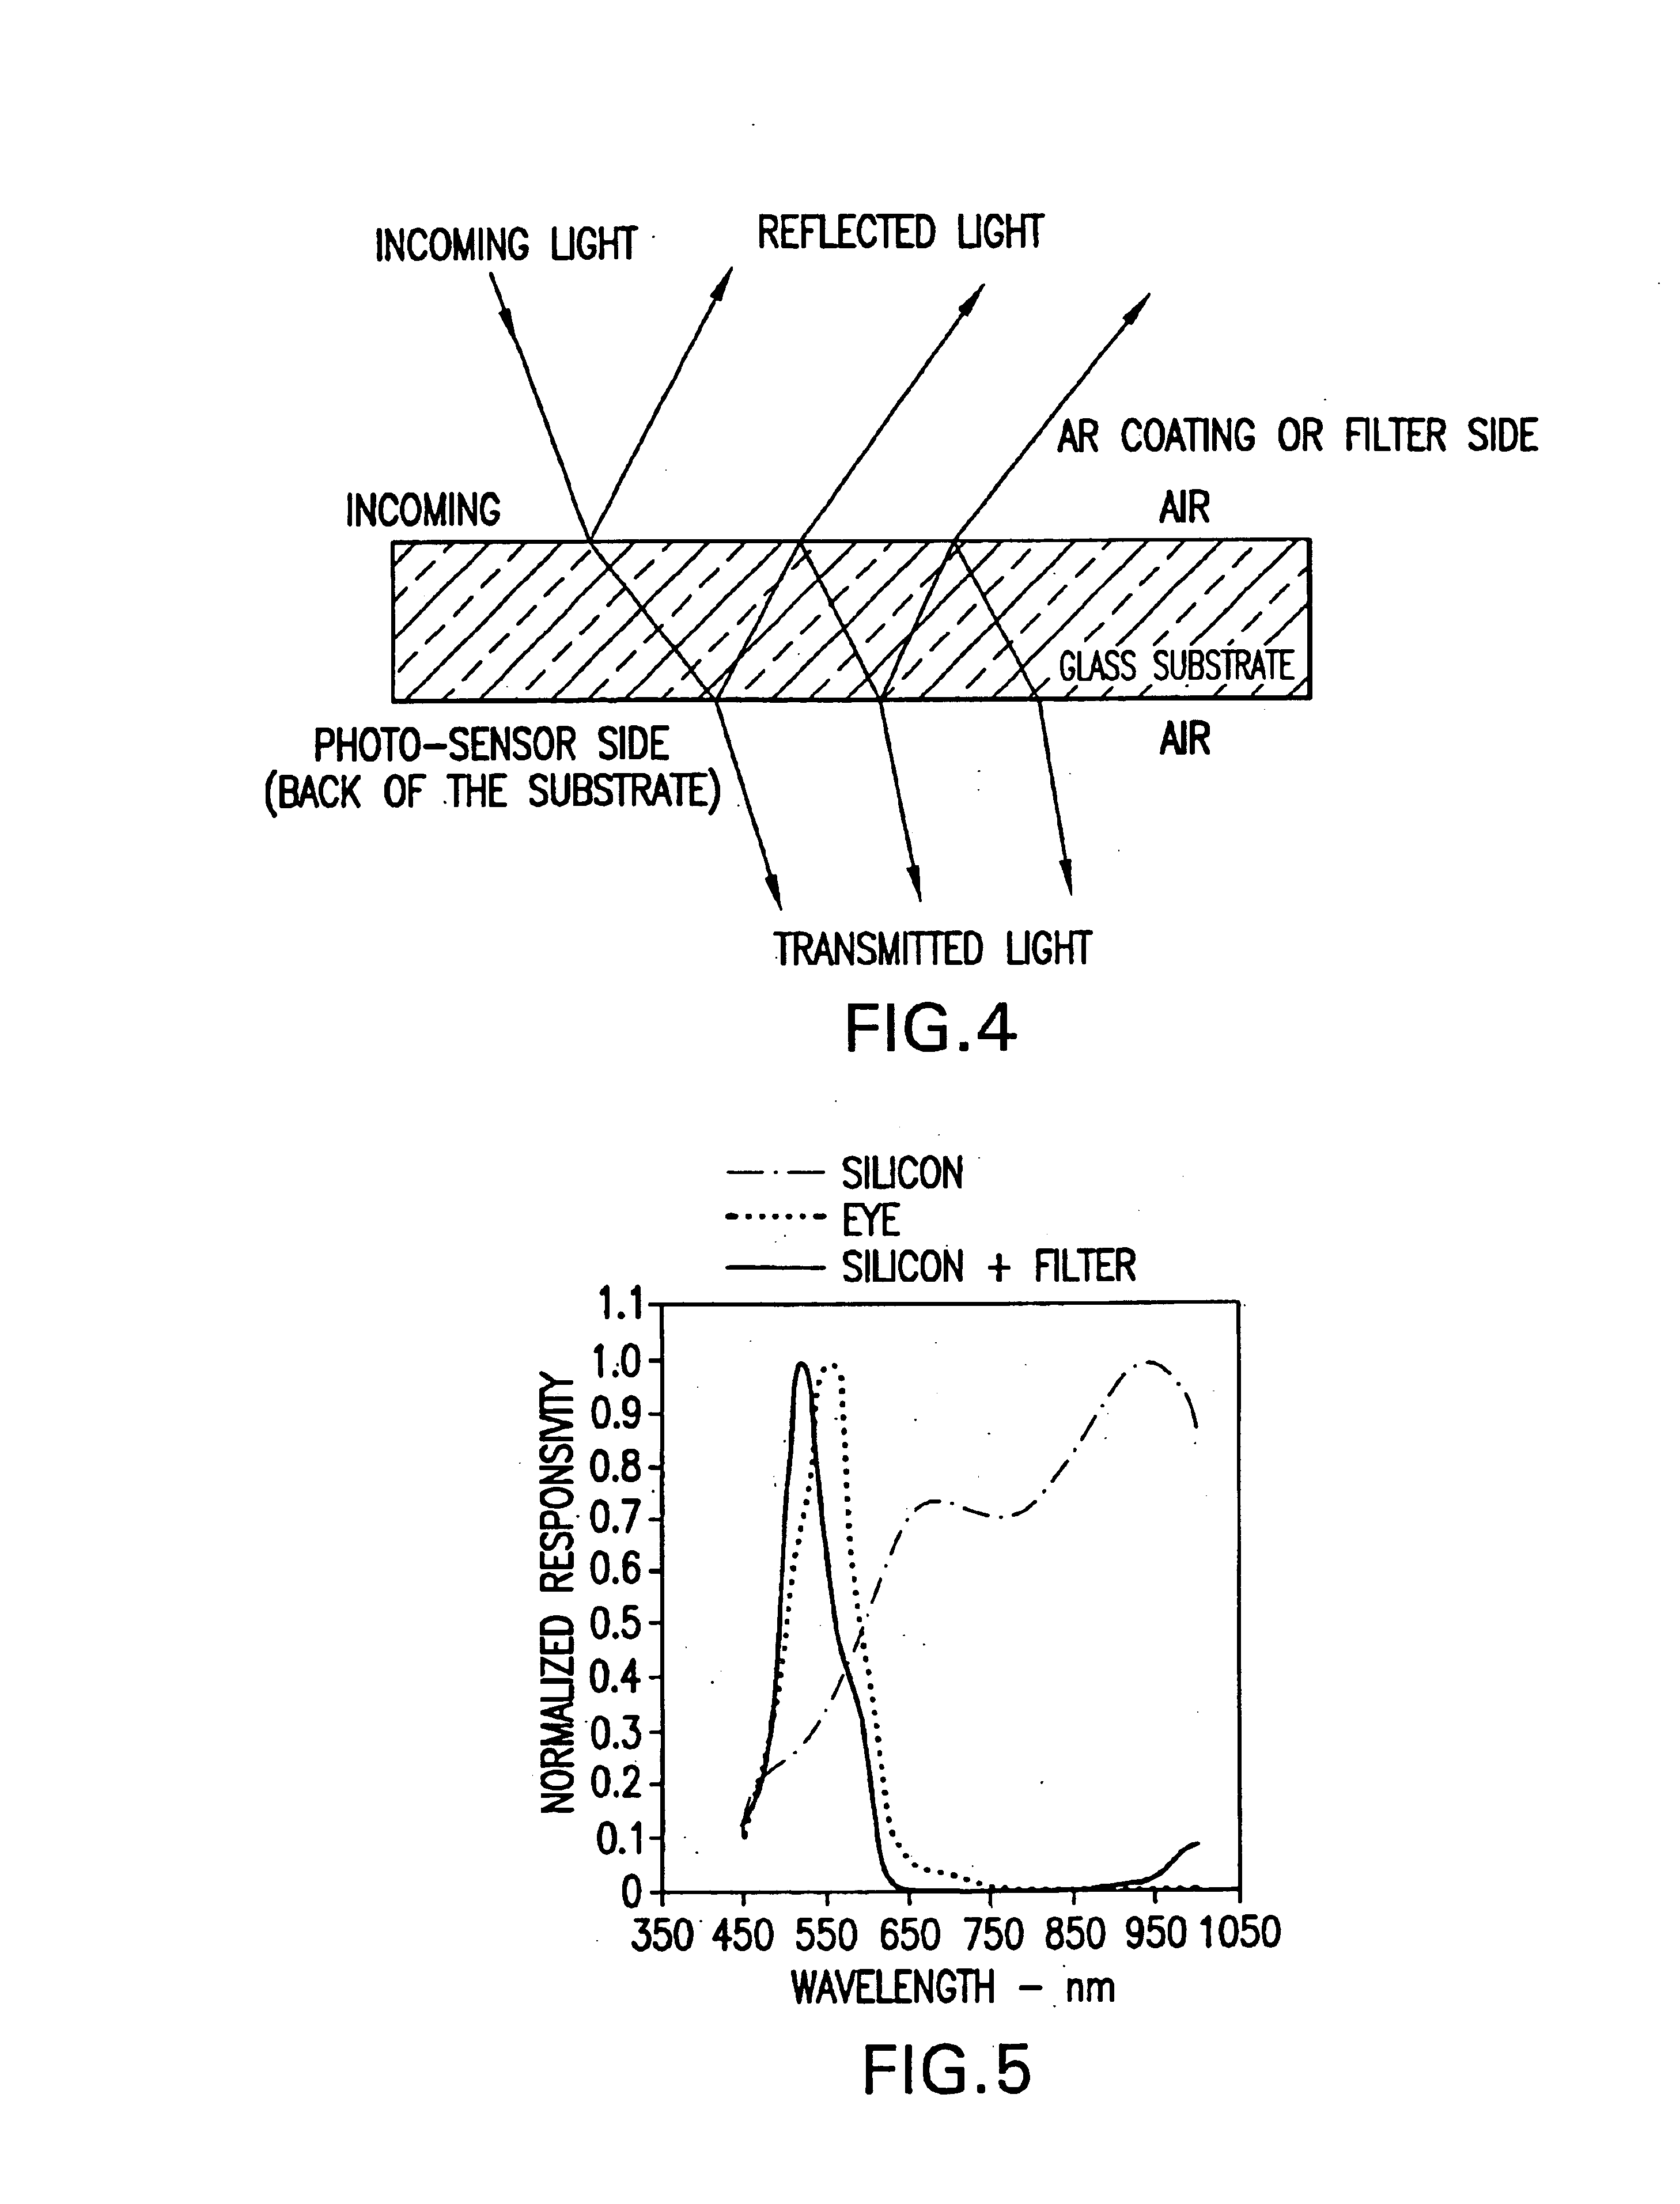 Electronic package of photo-sensing semiconductor devices, and the fabrication and assembly thereof